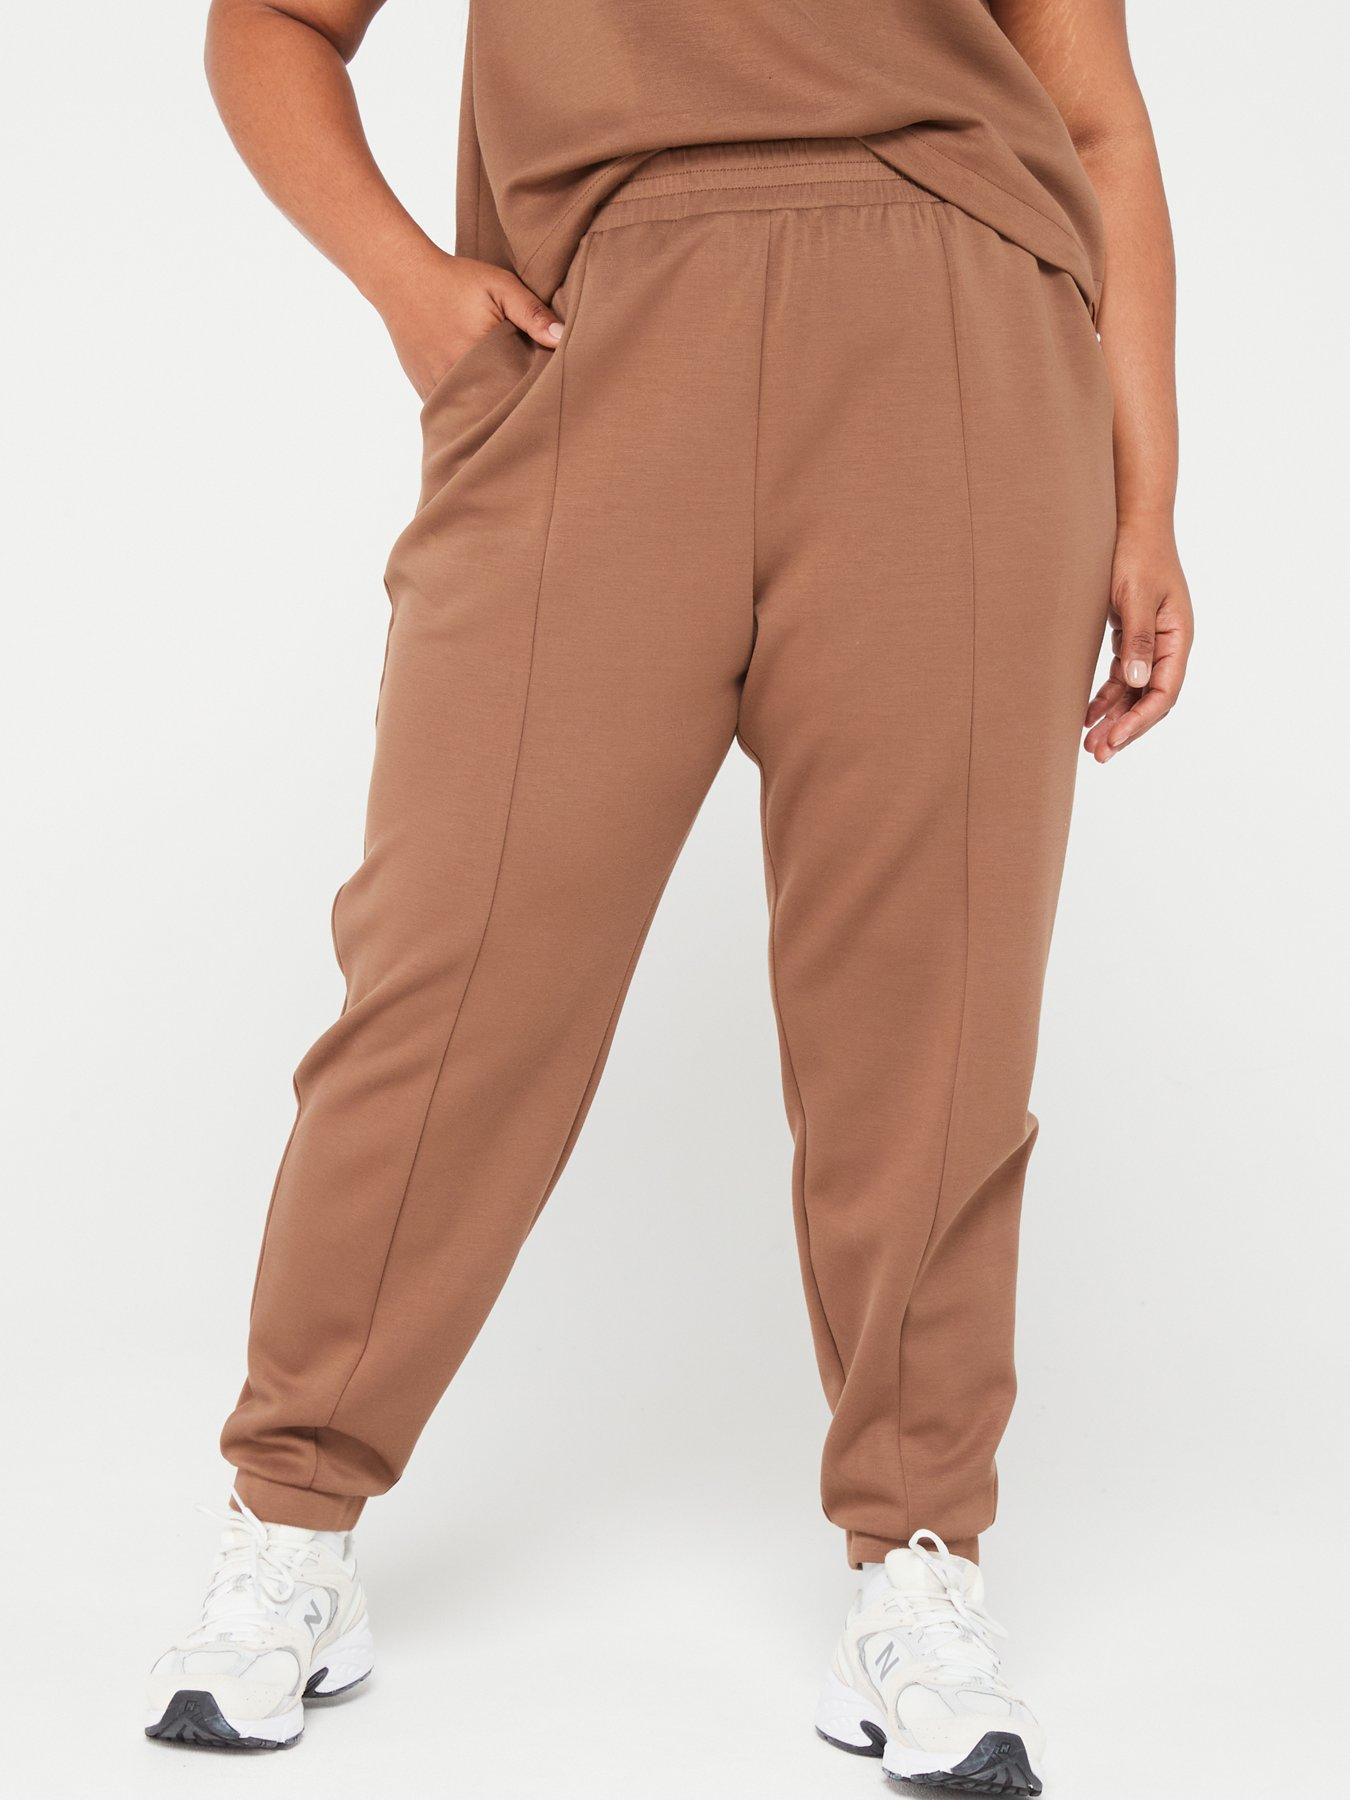 The Plus Tailored Tapered Pant in Linen-Blend